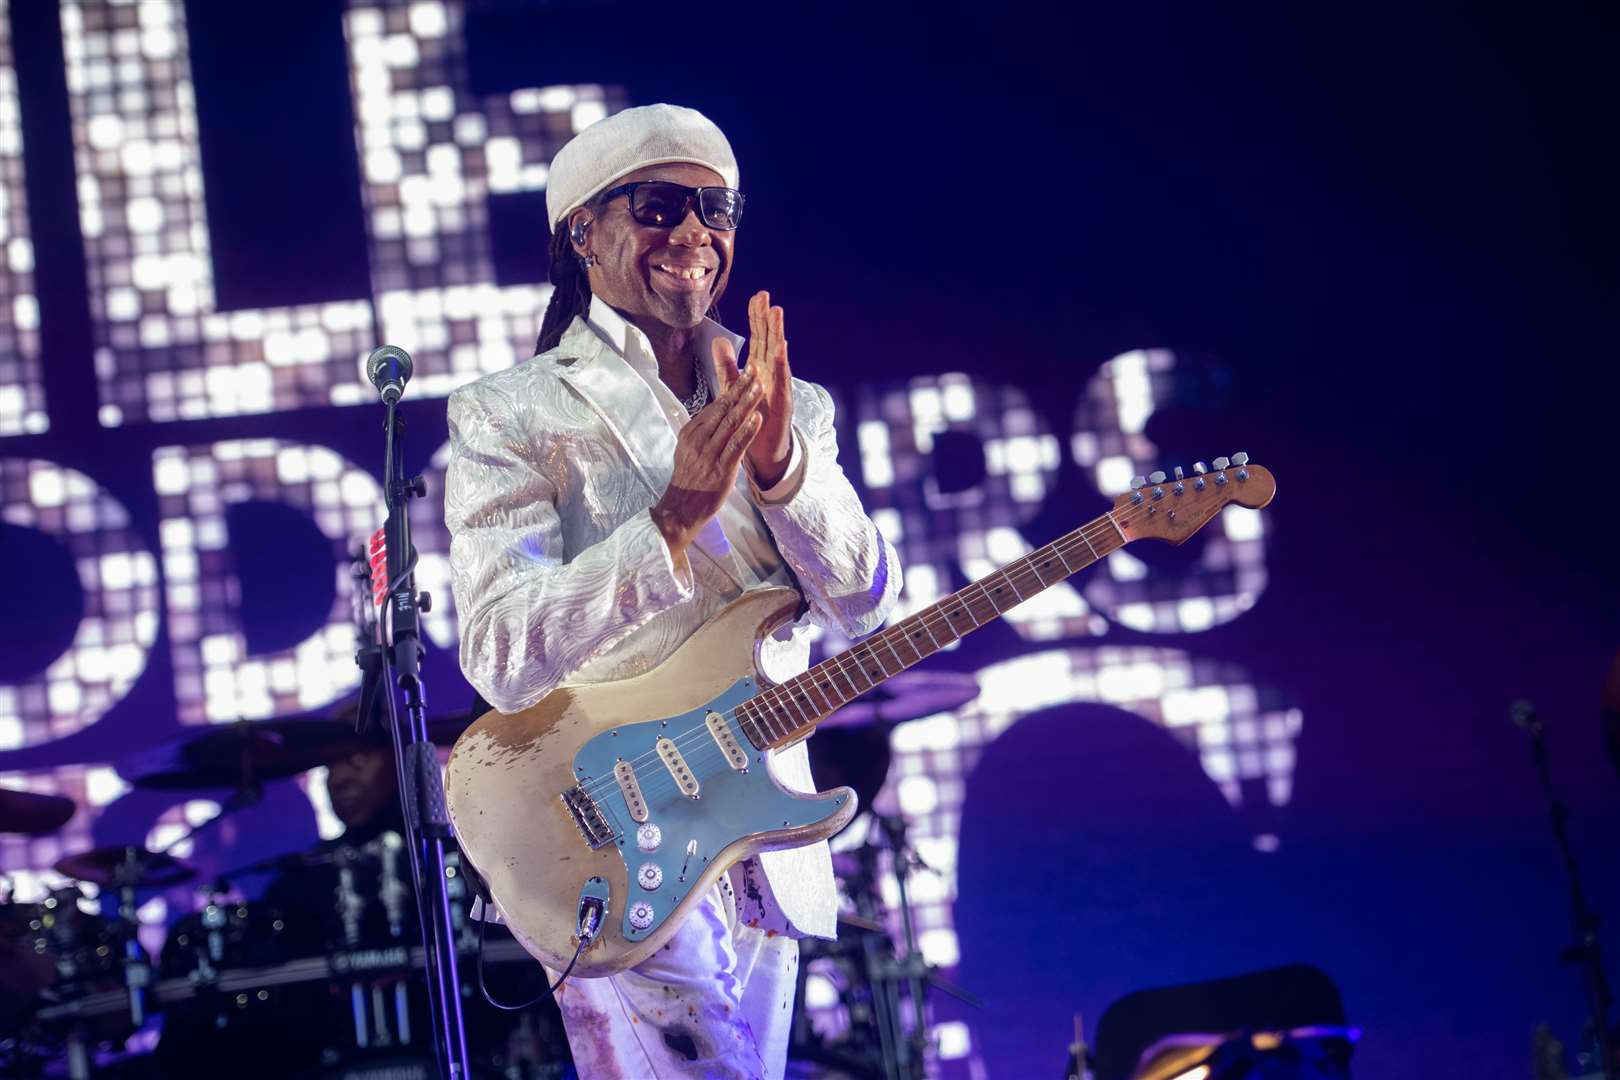 Nile Rodgers & Chic lit up the night. Picture: Callum Mackay